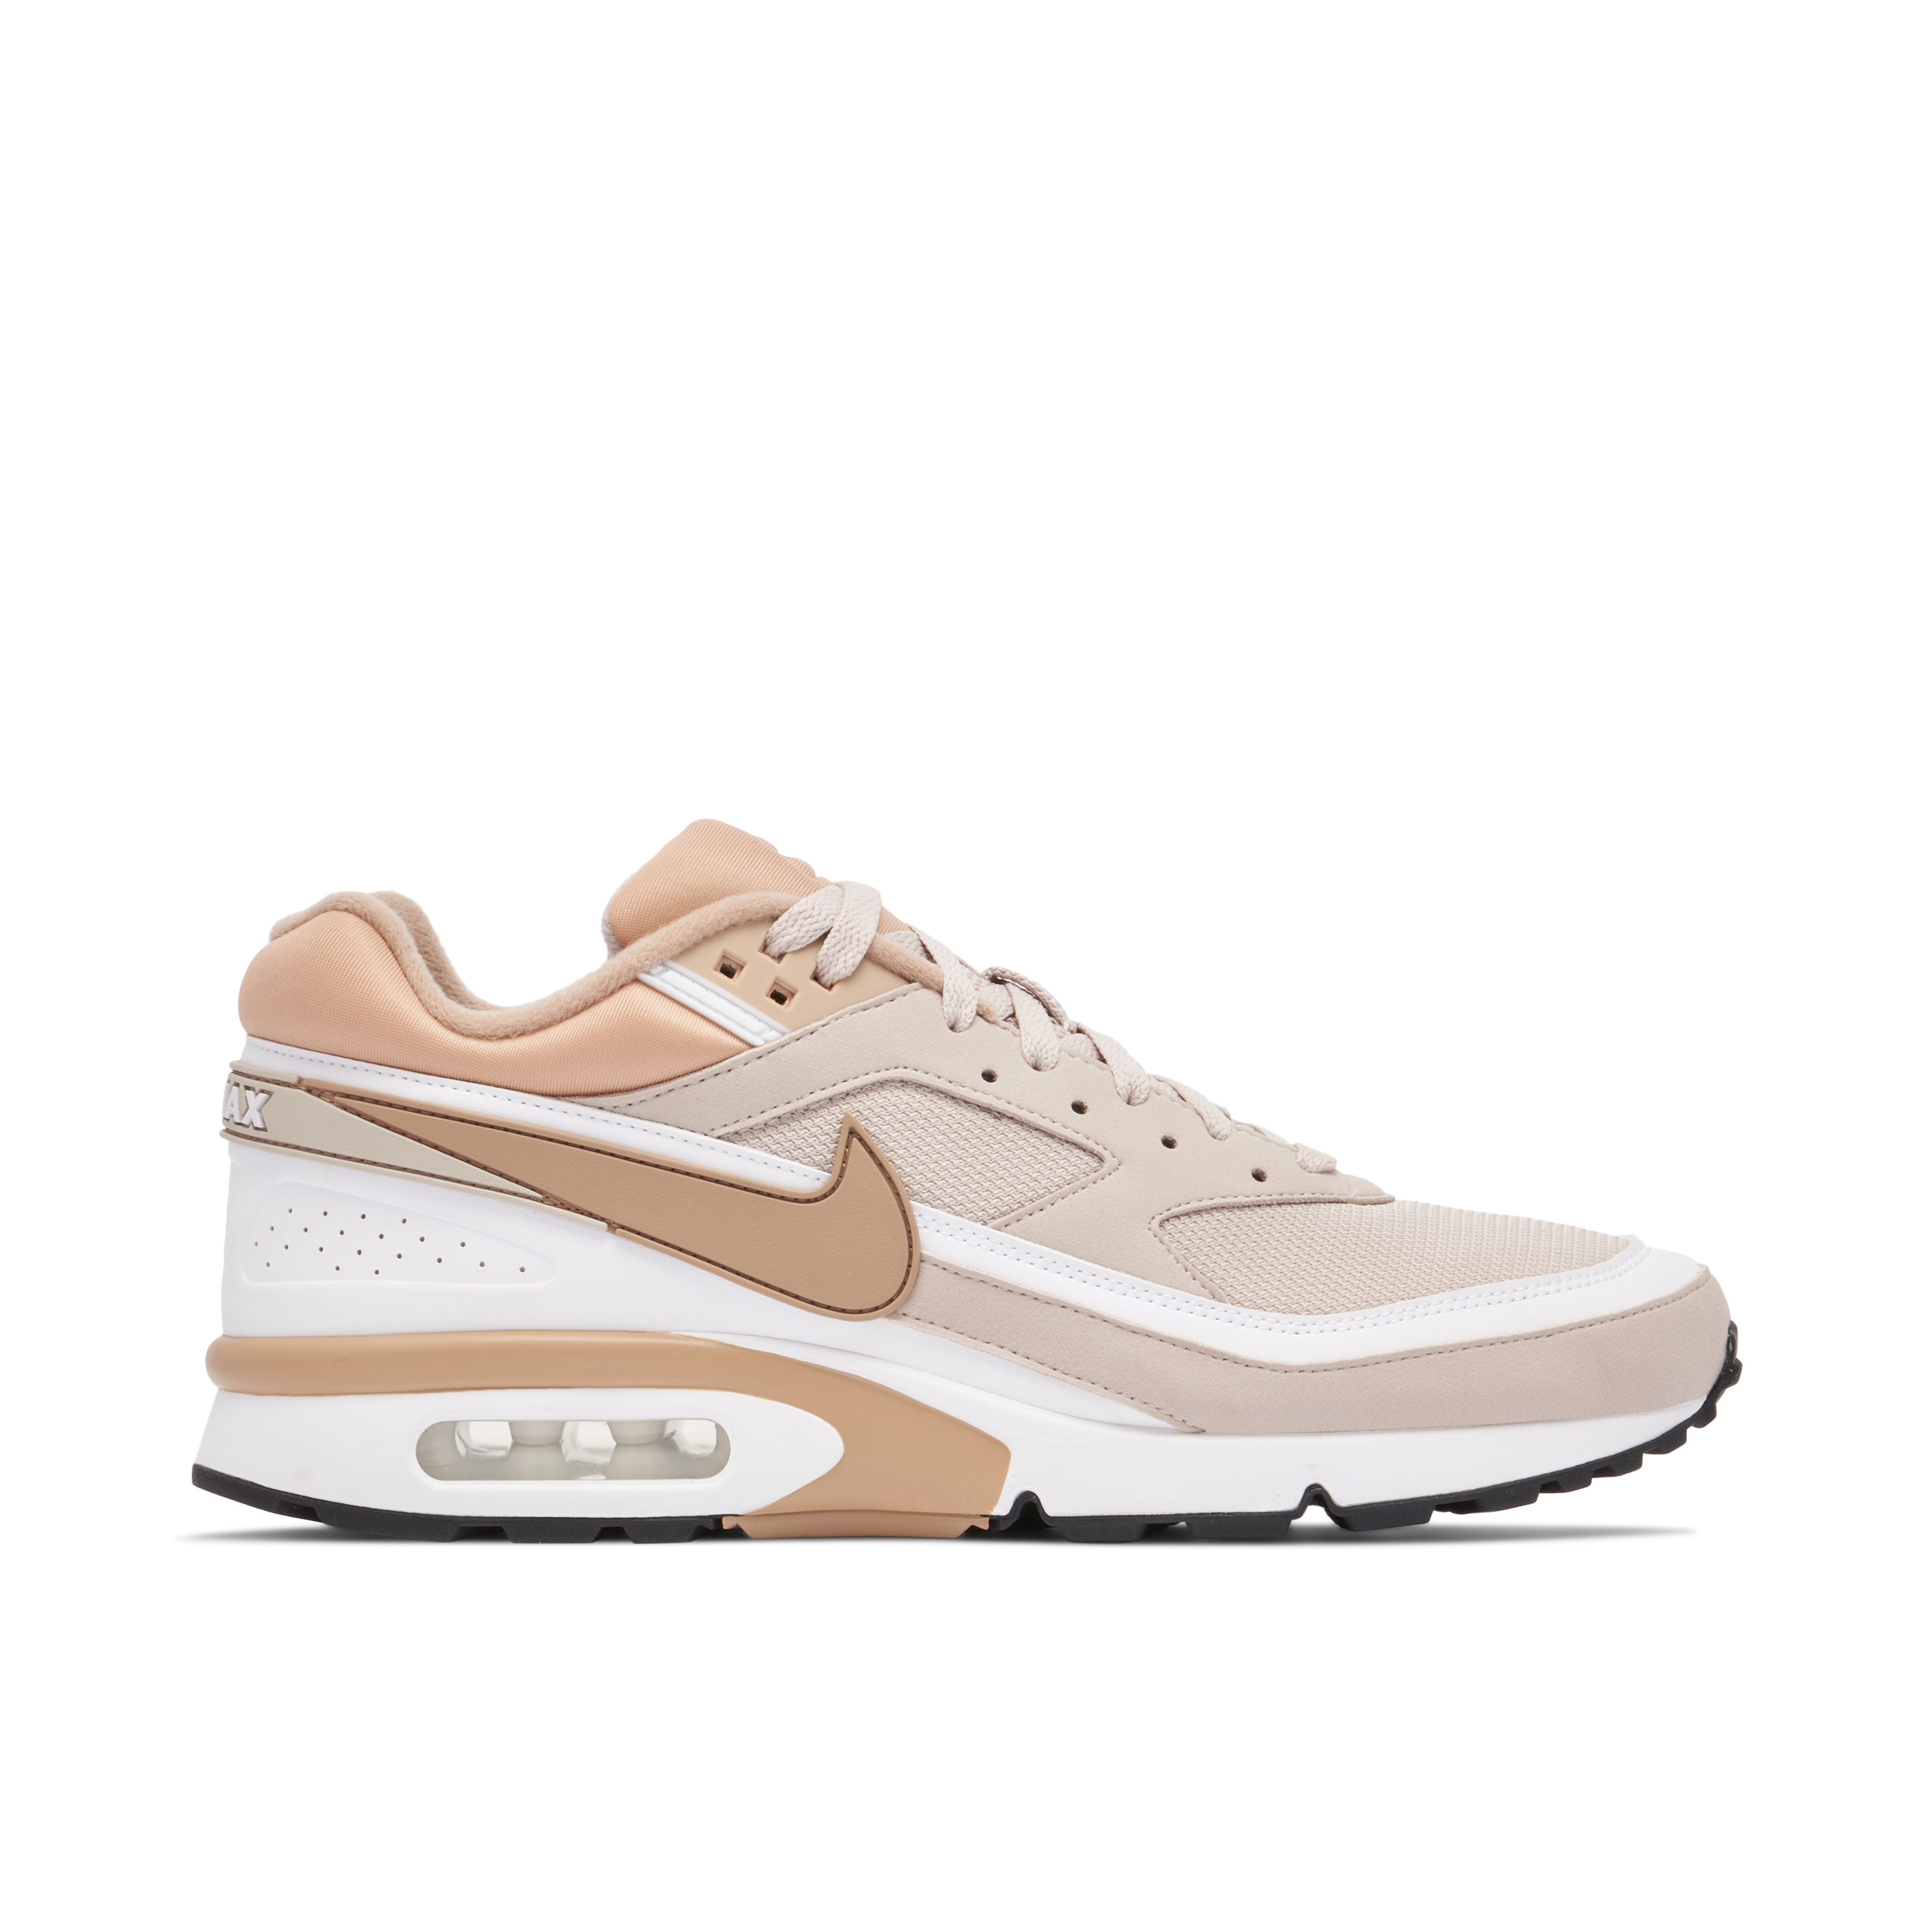 Nike Air Max Ultra | New BW Ultra Trainers Shoes